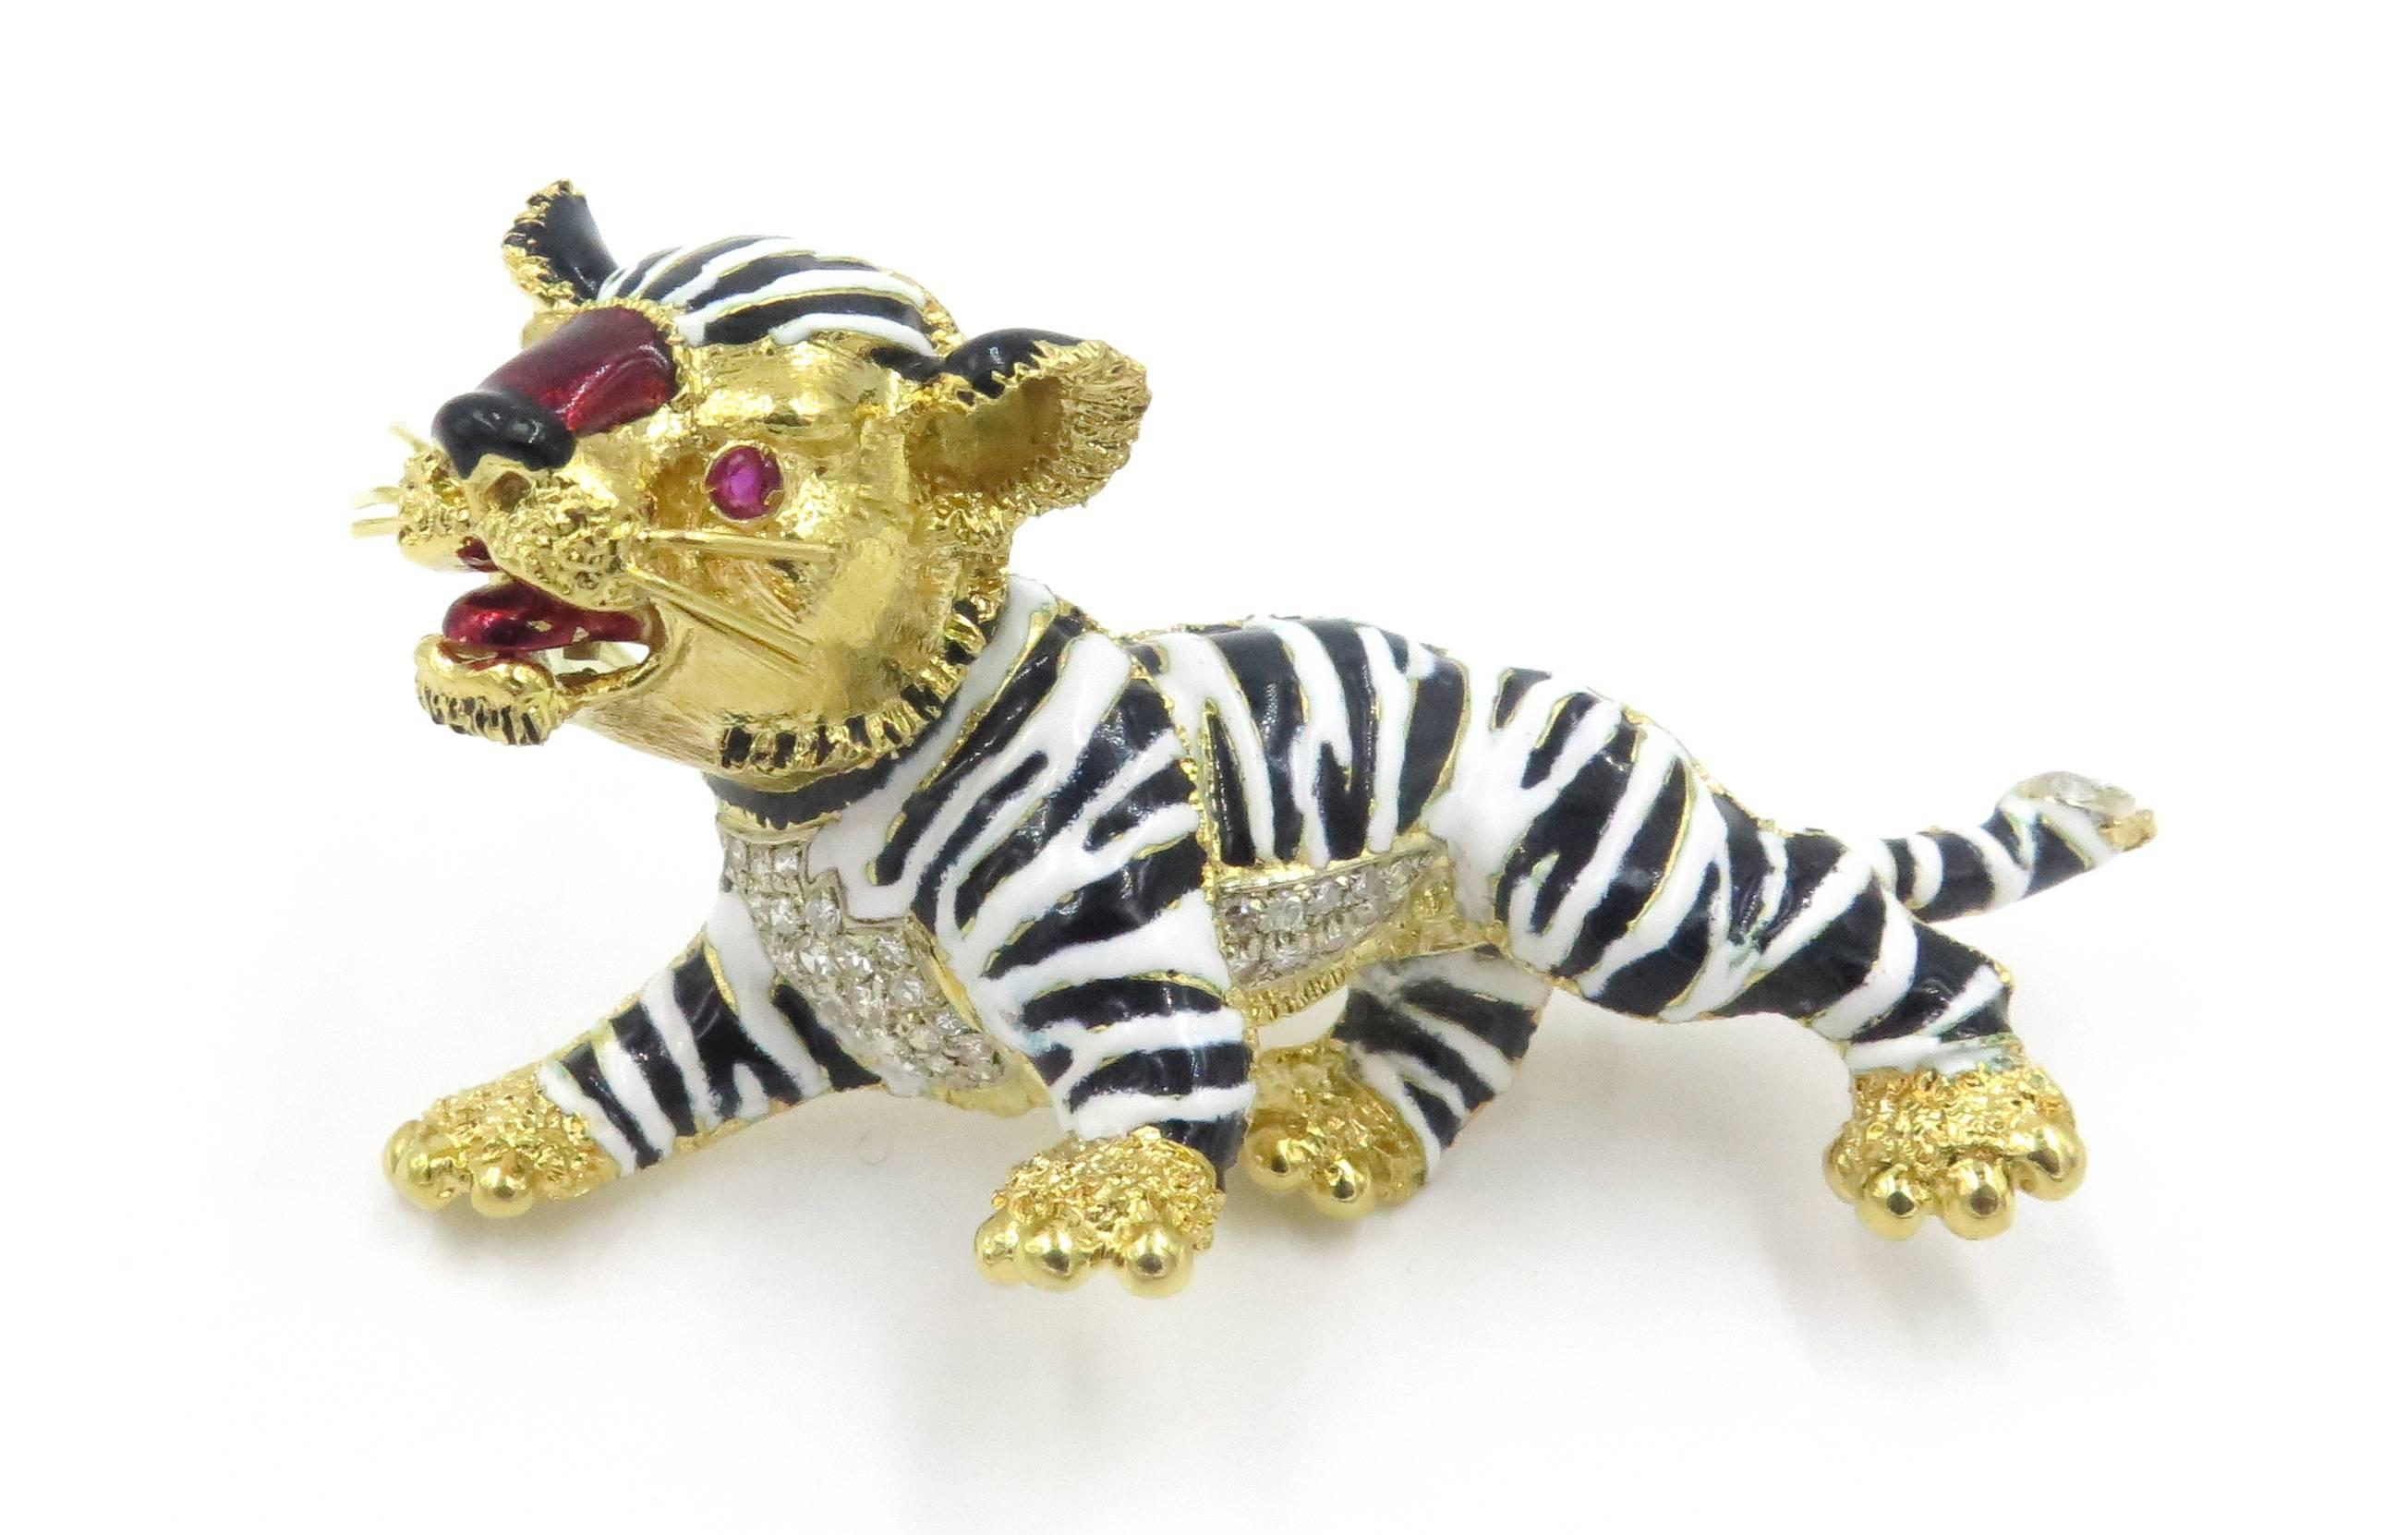 An 18 karat yellow gold, enamel and diamond tiger brooch.  Signed Frascarolo, Italy.  Circa 1970.  Designed as a white and black enamel stylized tiger, with pavé-set diamond accents, enhanced by red enamel nose and tongue, with circular-cut ruby